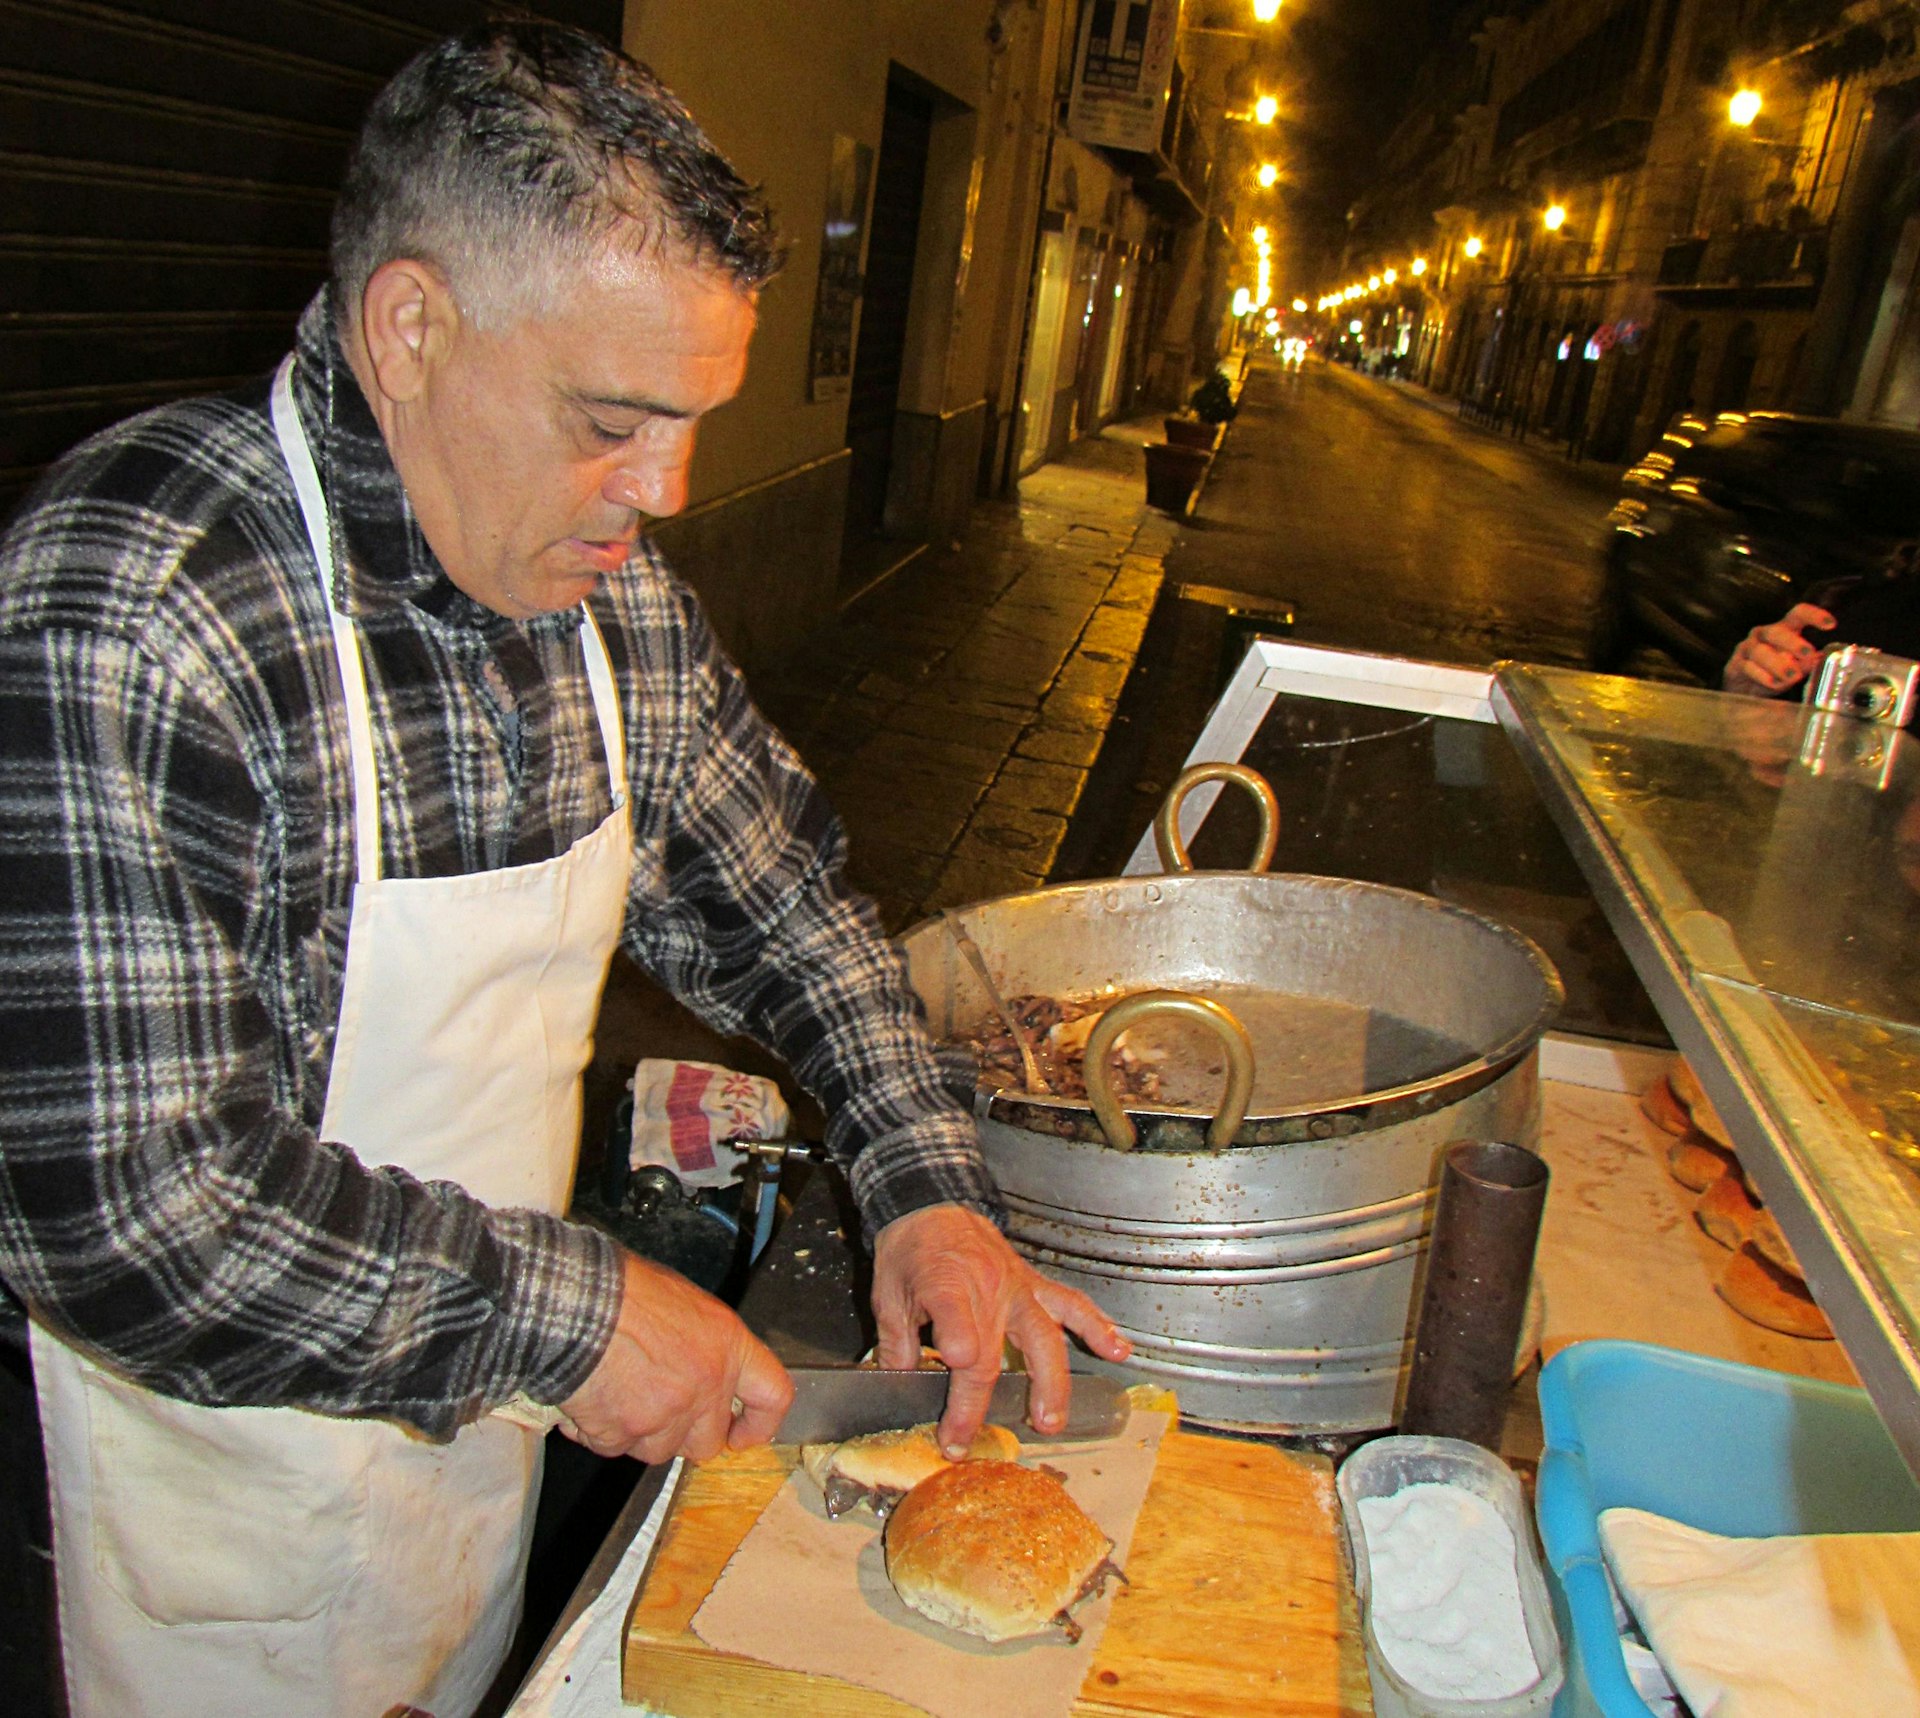 Rocky Basile, the 'King of Vucciria', prepares pani ca meusa. Image by Gregor Clark / Lonely Planet